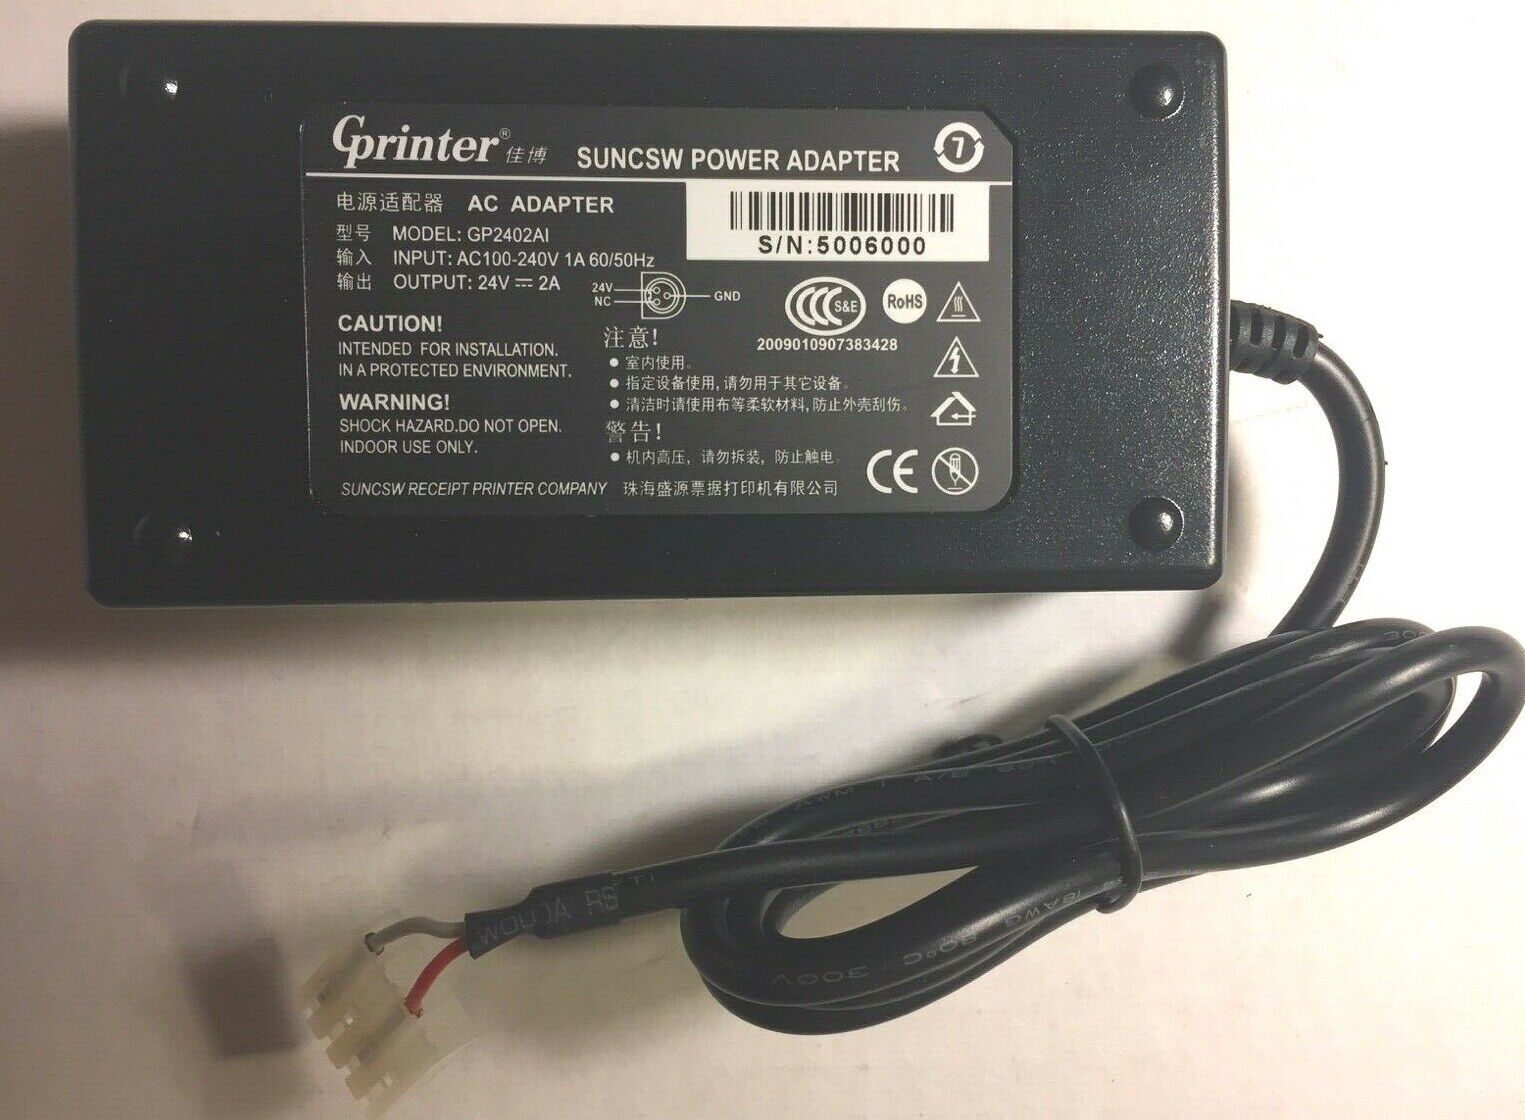 Gprinter GP-2402AI. 24V 2A AC Adapter. Suncsw Power Adapter, Never Used Country/Region of Manufacture: China Type: A